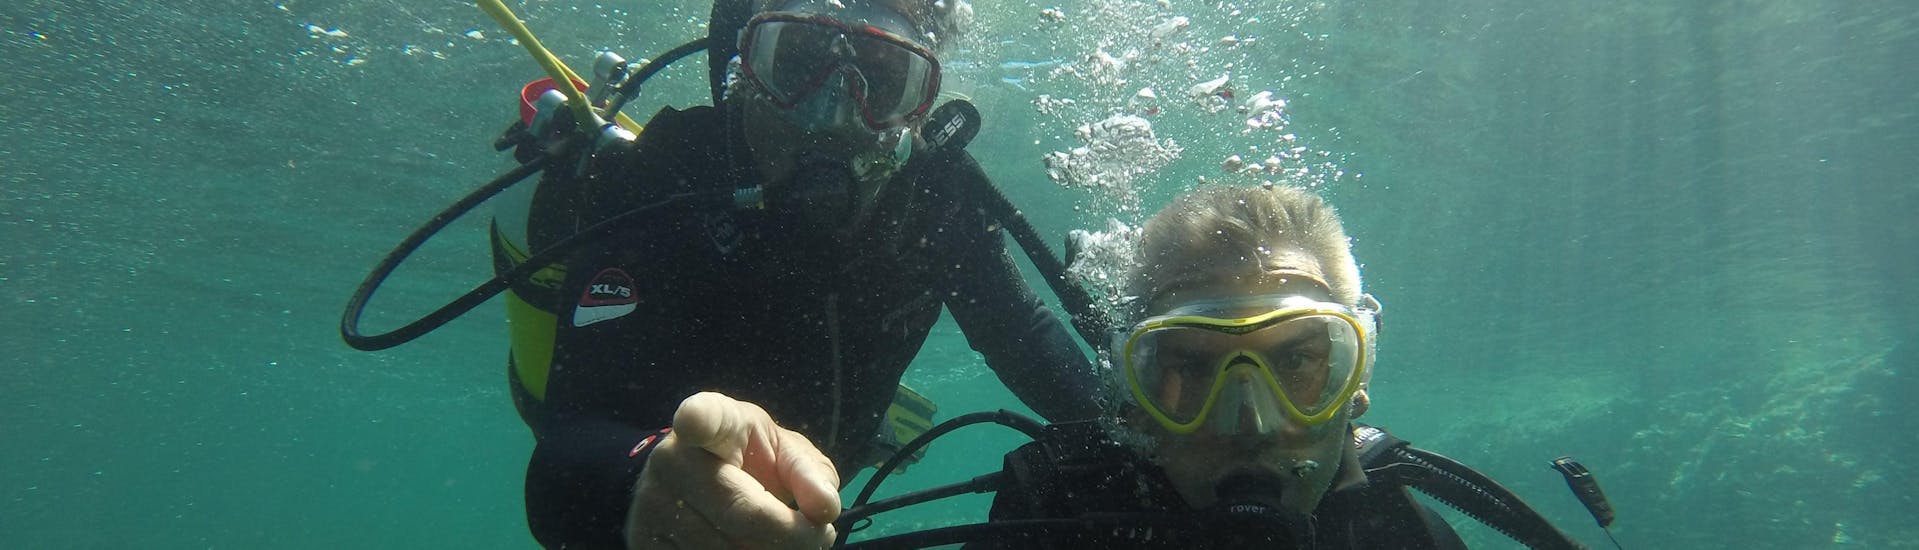 A diver and his instructor are having fun underwater during the PADI Discover Scuba Diving in Saint-Raphaël Bay with Dive Is Fun.